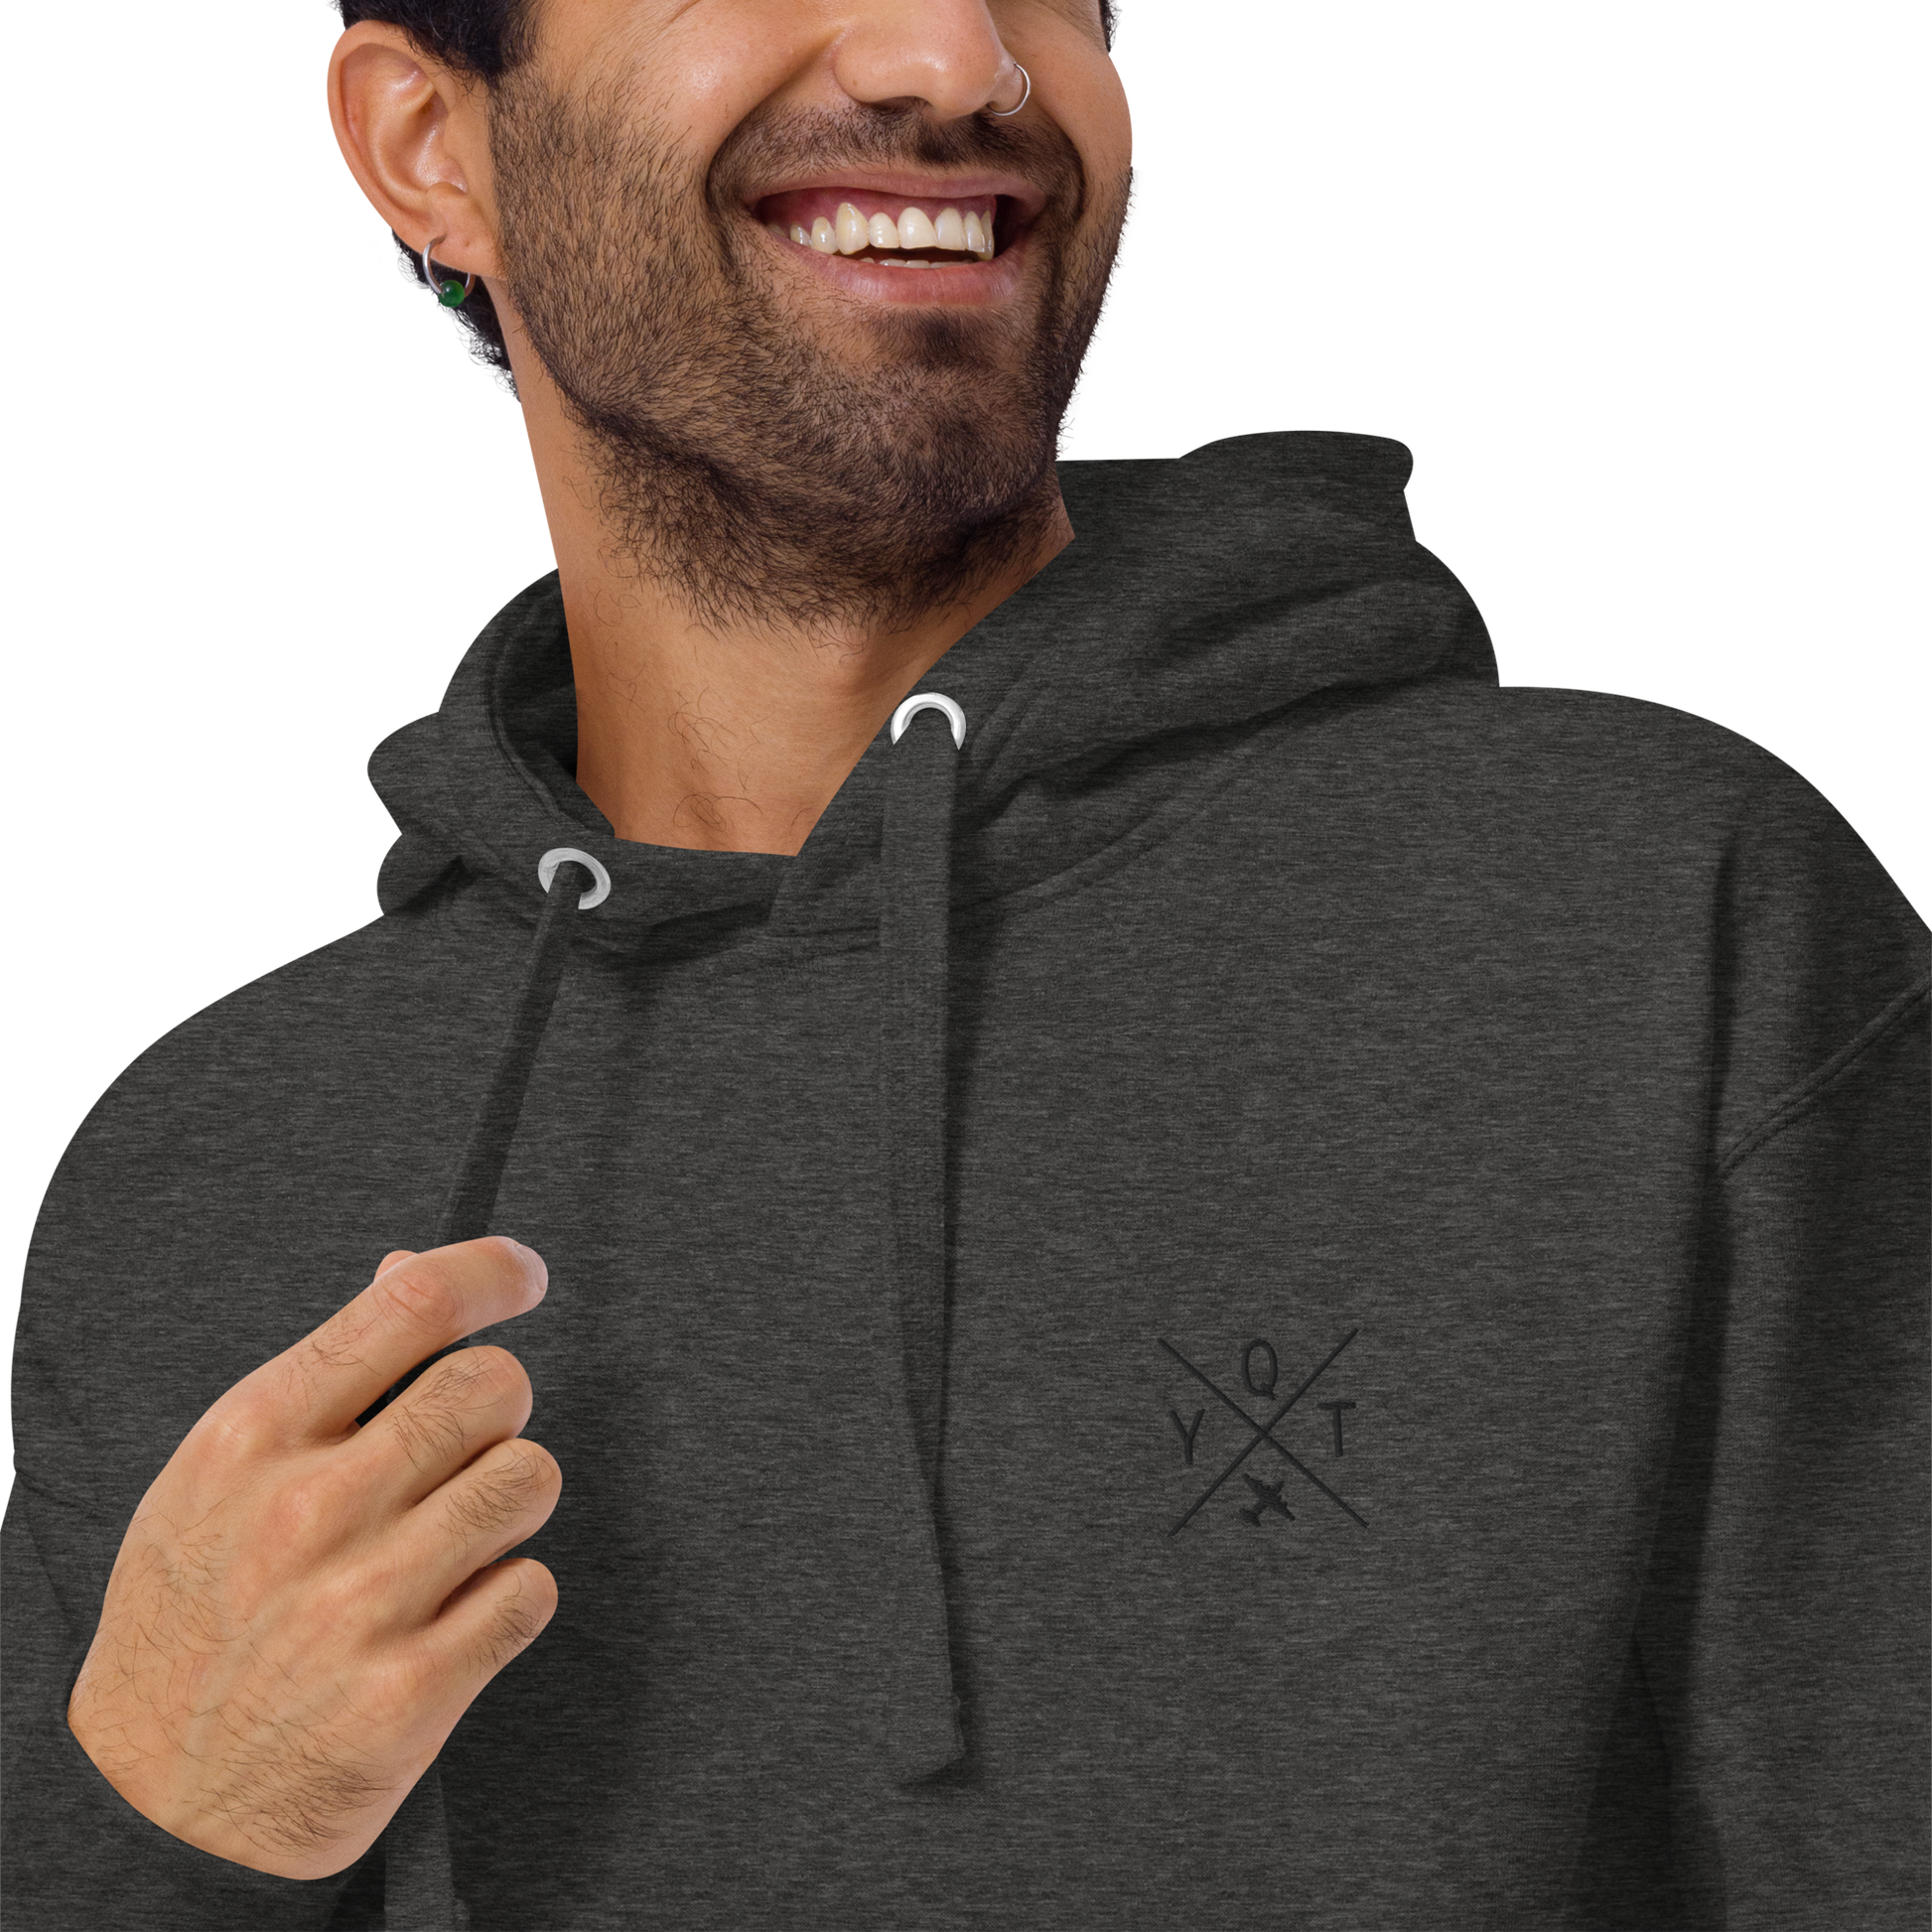 YHM Designs - YQT Thunder Bay Premium Hoodie - Crossed-X Design with Airport Code and Vintage Propliner - Black Embroidery - Image 12